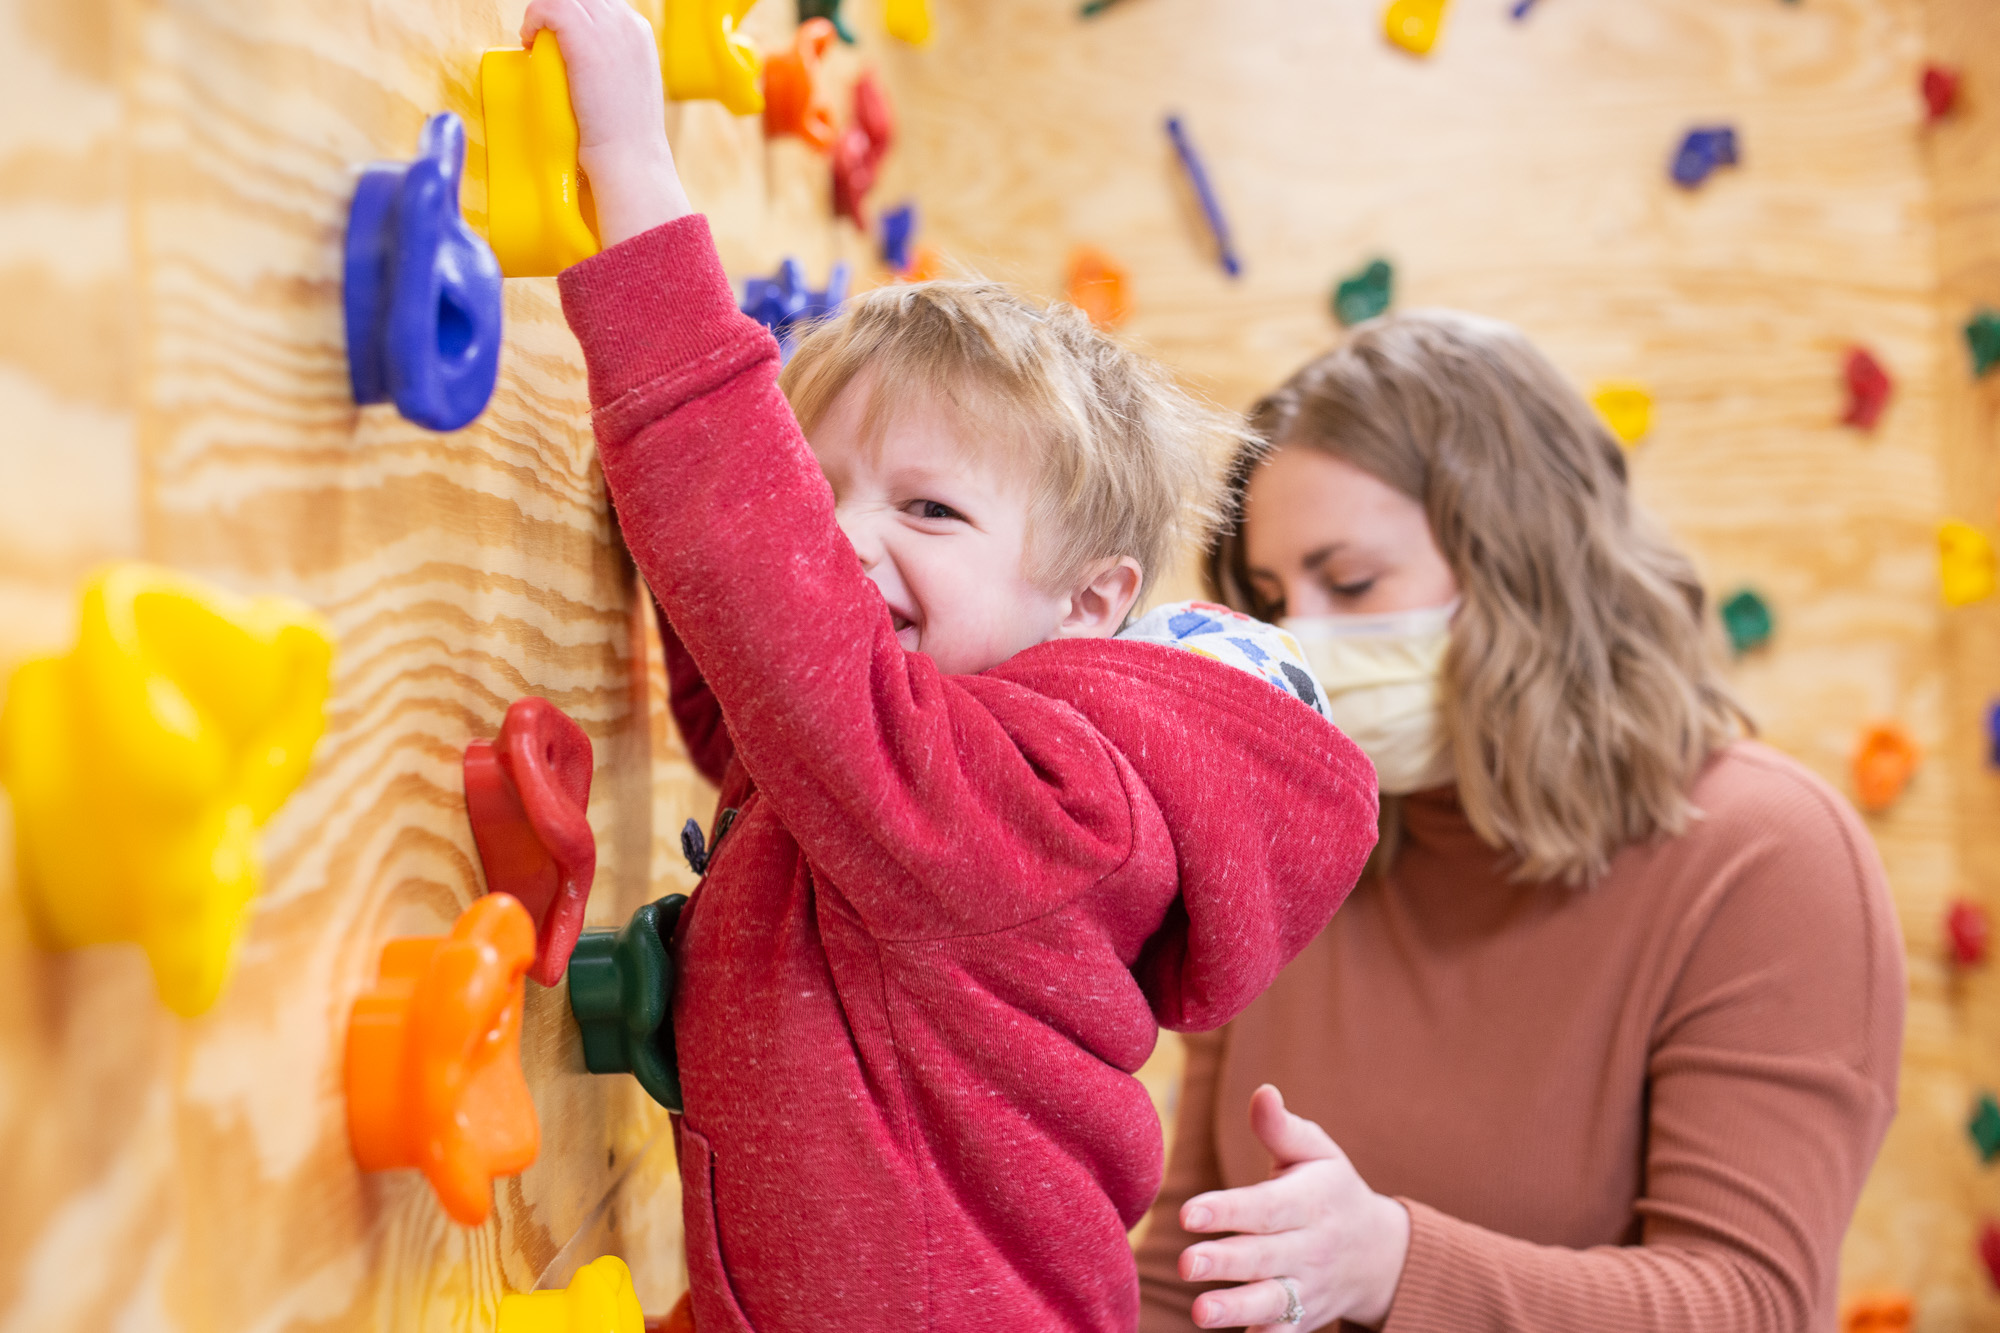 Occupational Therapist Alyssa Lucas, MS, OTR/L, celebrates with a patient after success on St. Luke’s in-house pediatric climbing wall.